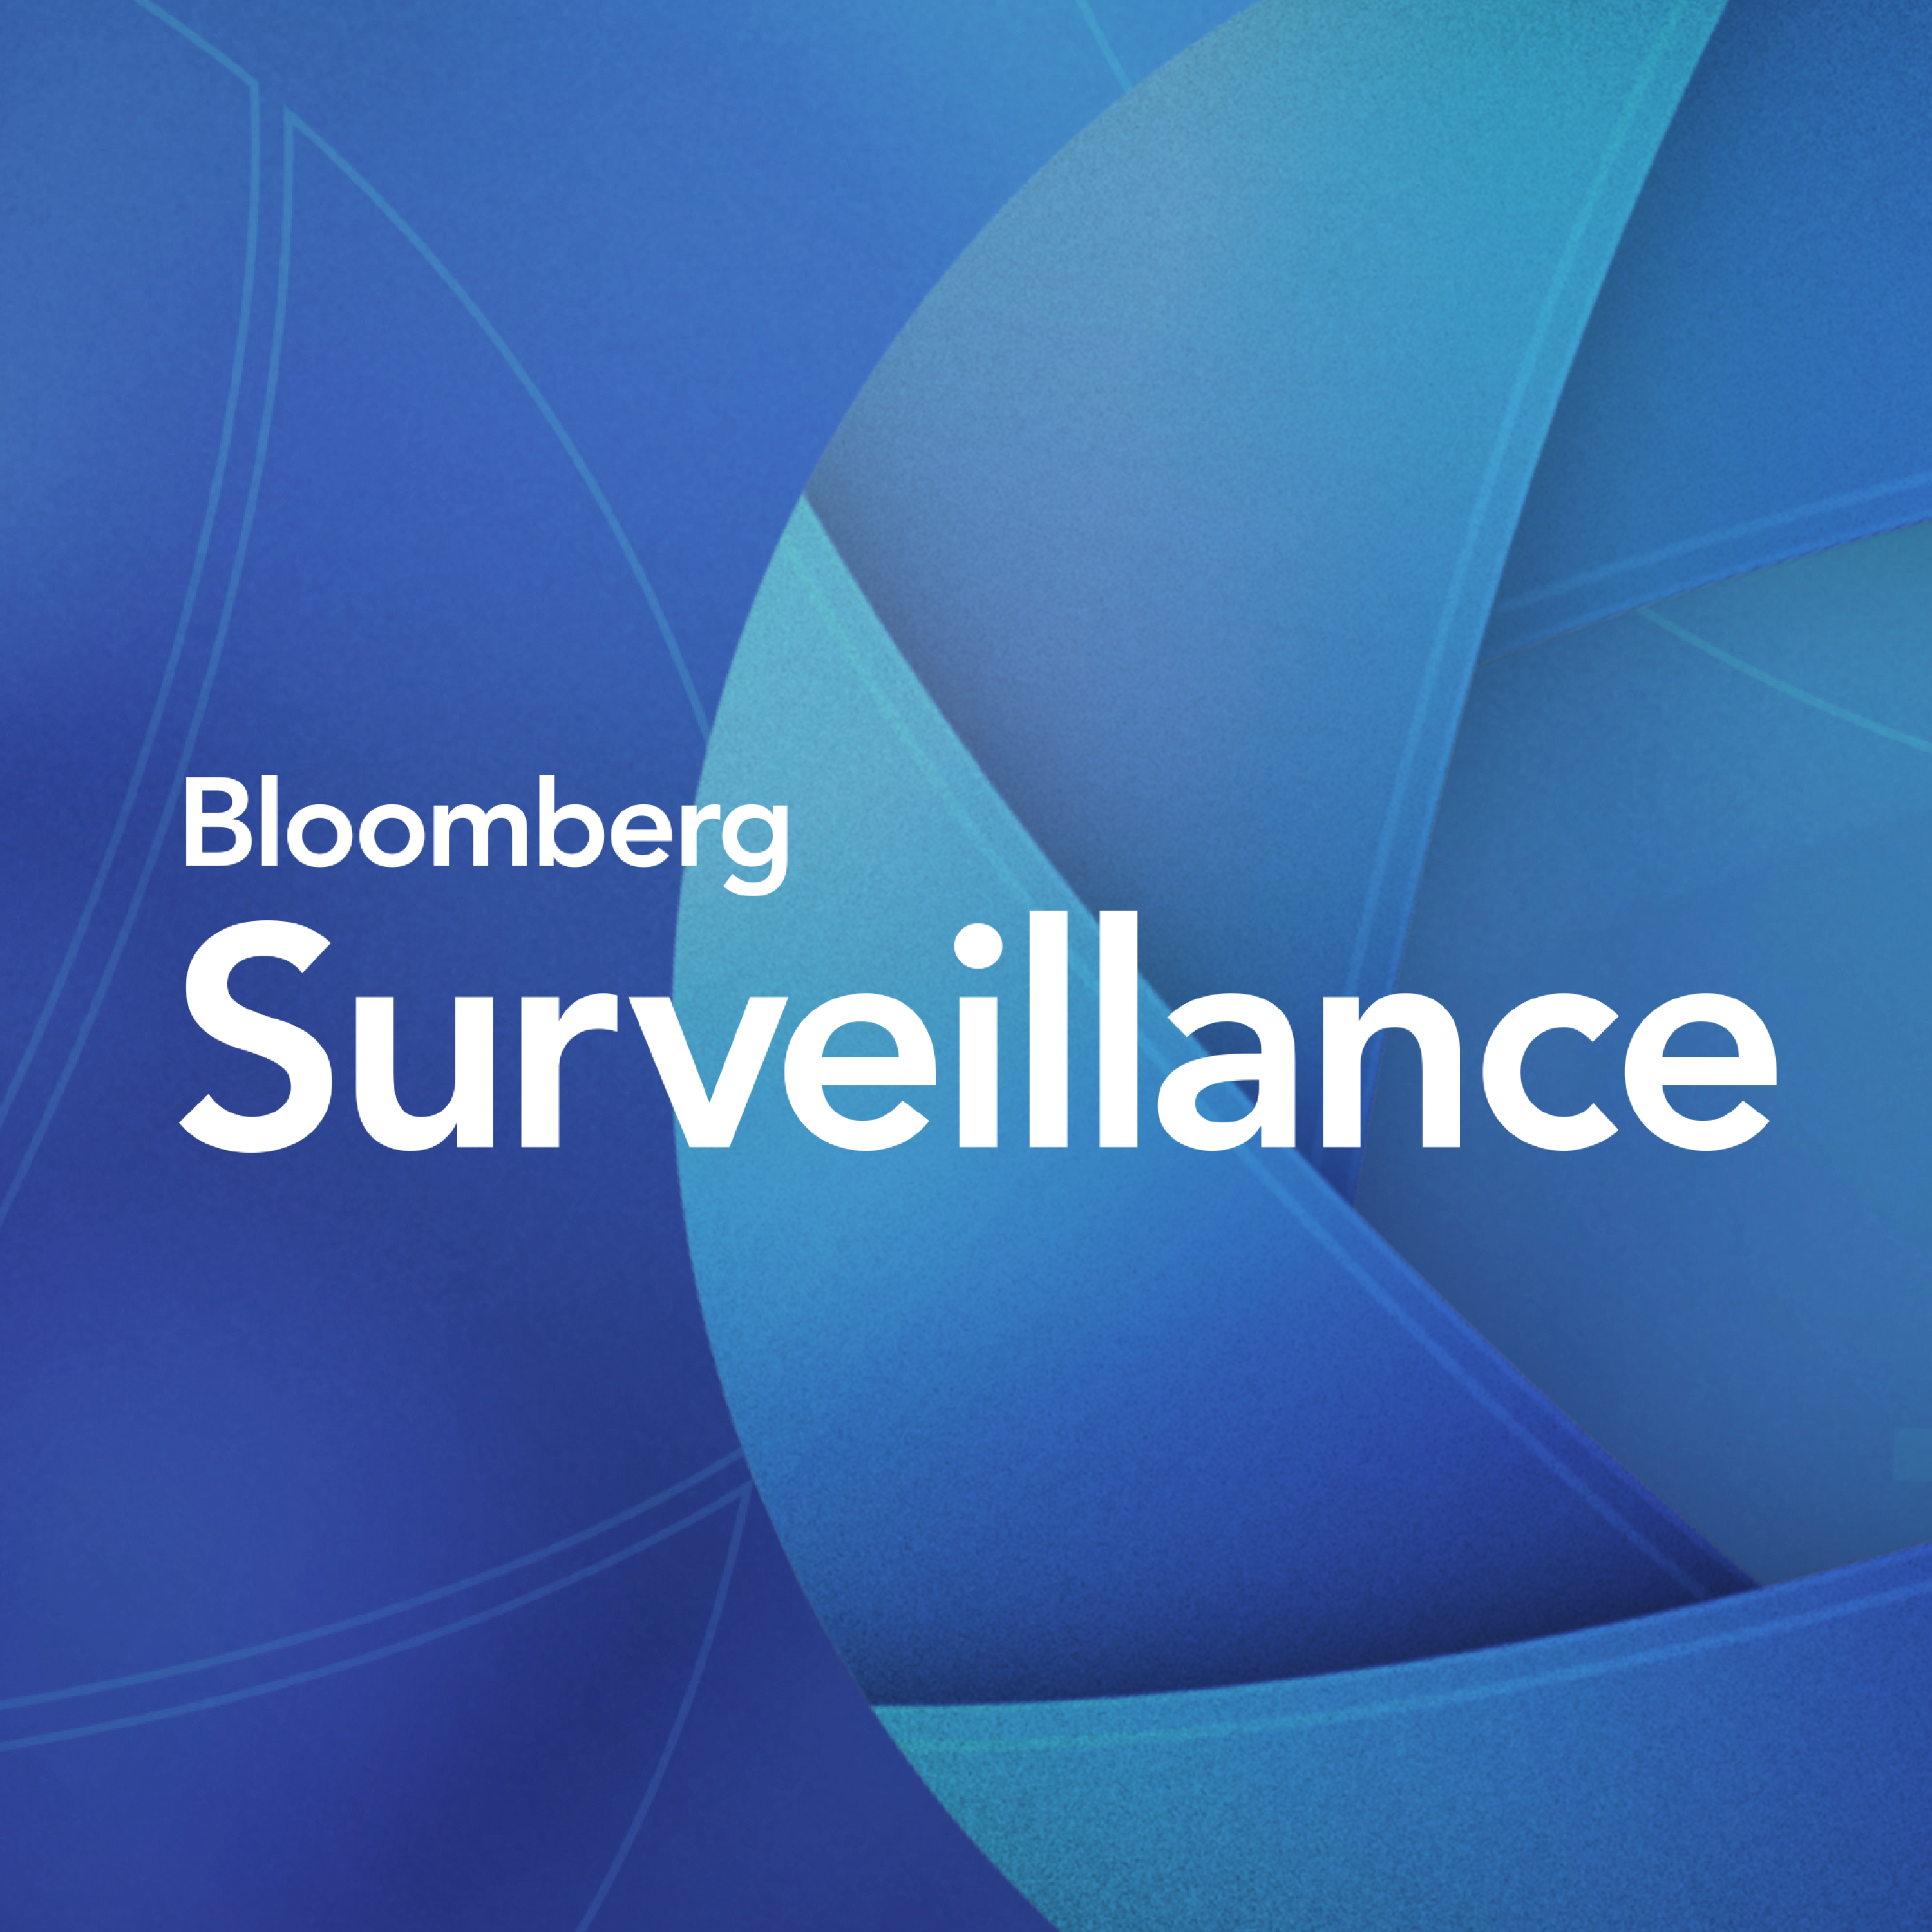 Surveillance: Slowing Economy with Hyman (Podcast)